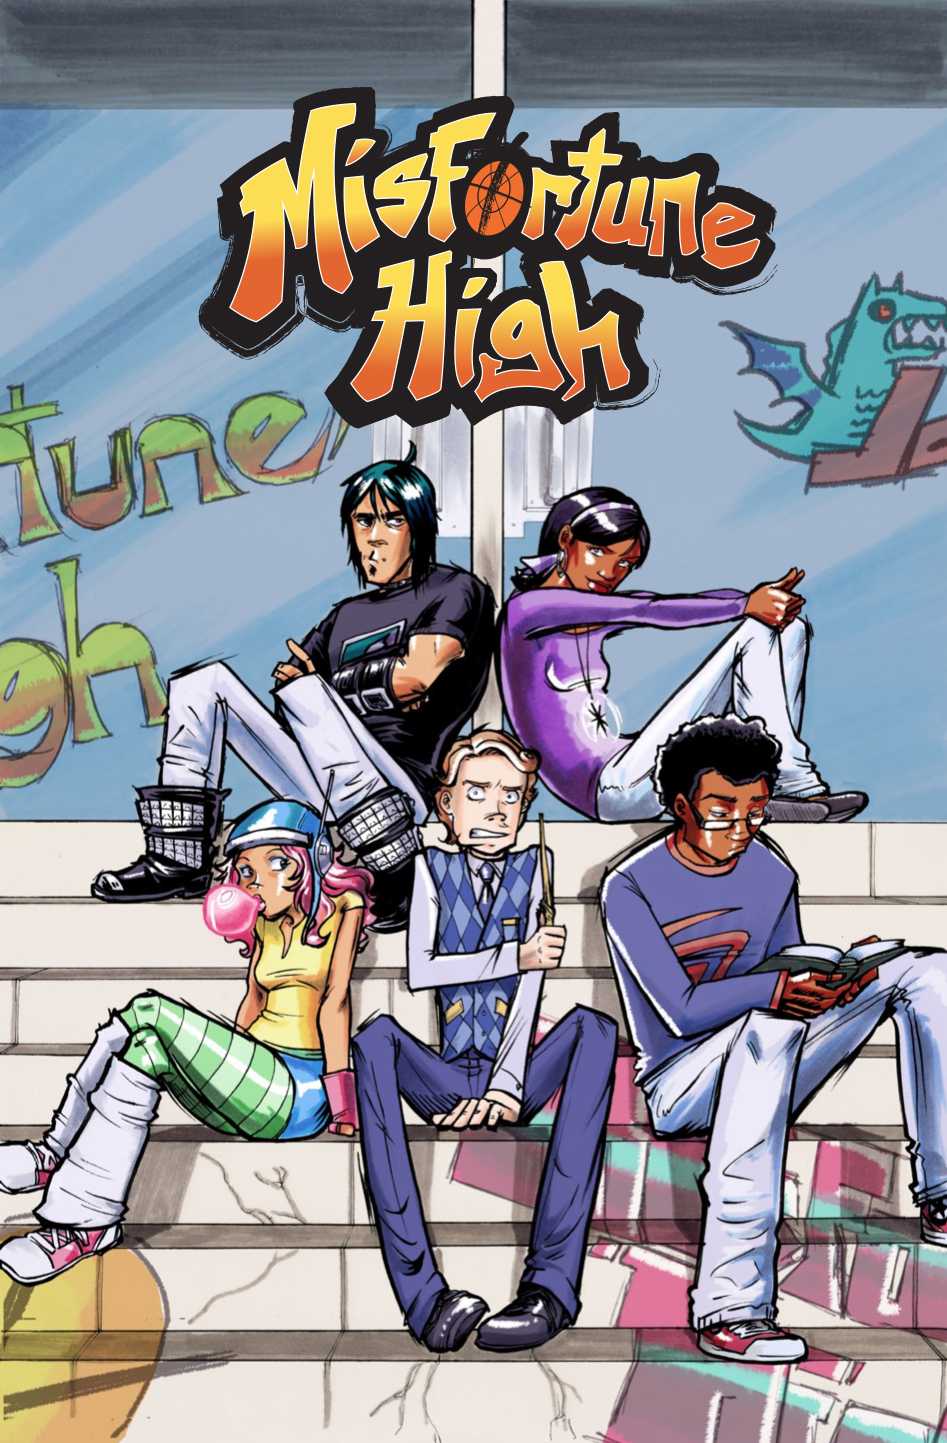 COURTESY // Jules Rivera‘Misfortune High’ is a graphic novel that focuses on a snobby wizard named Will Bicksford as he gets expelled for cheating from his prestigious school and transferred to a public one.